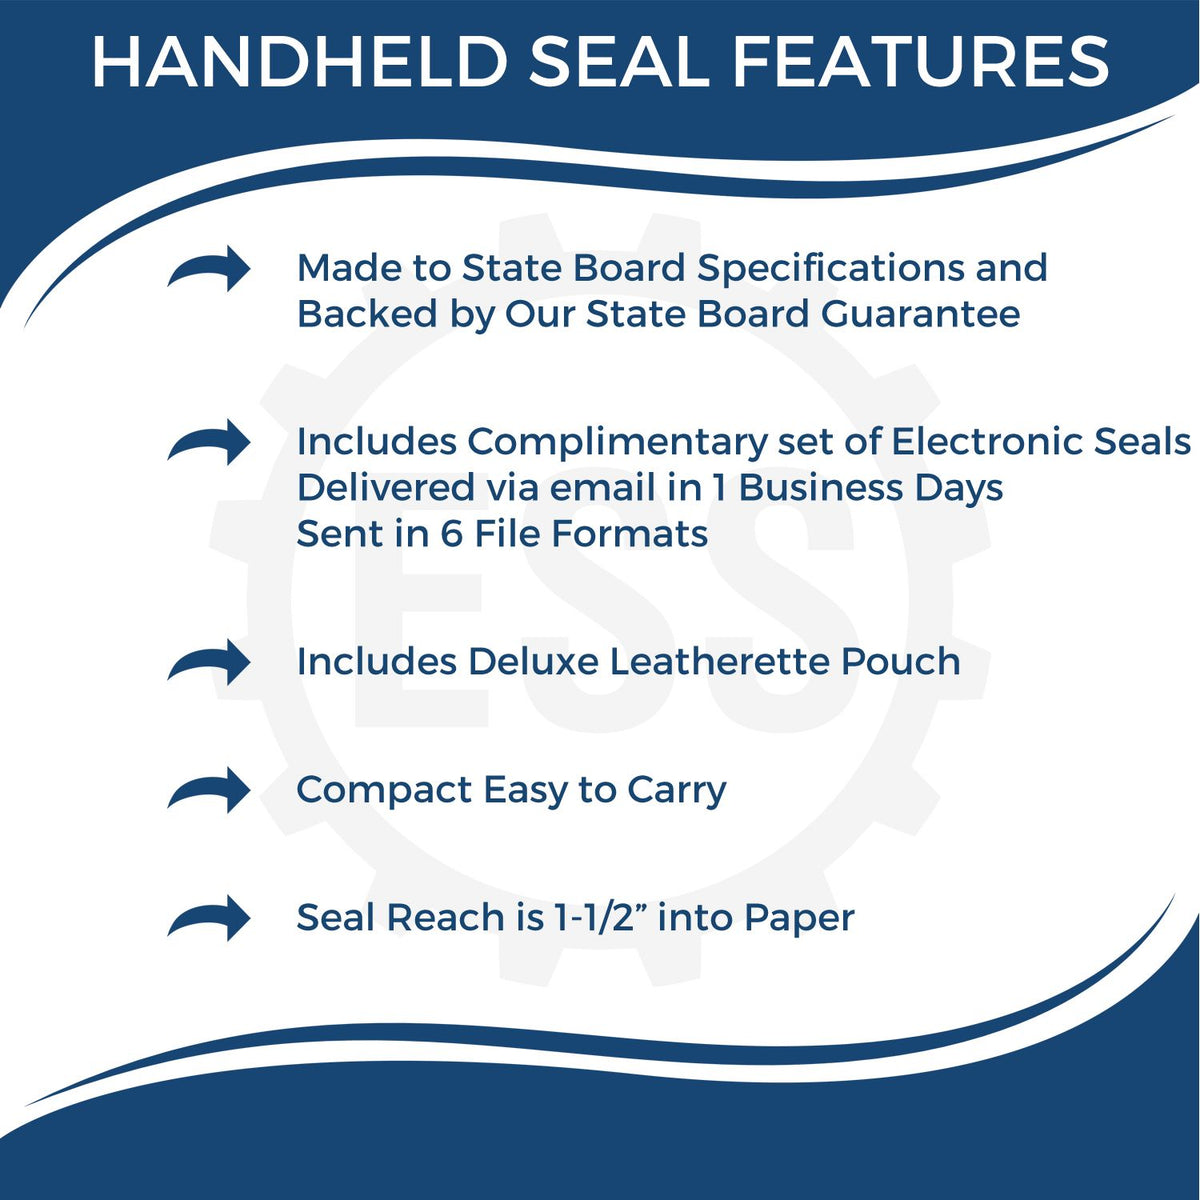 A picture of an infographic highlighting the selling points for the Handheld Michigan Land Surveyor Seal